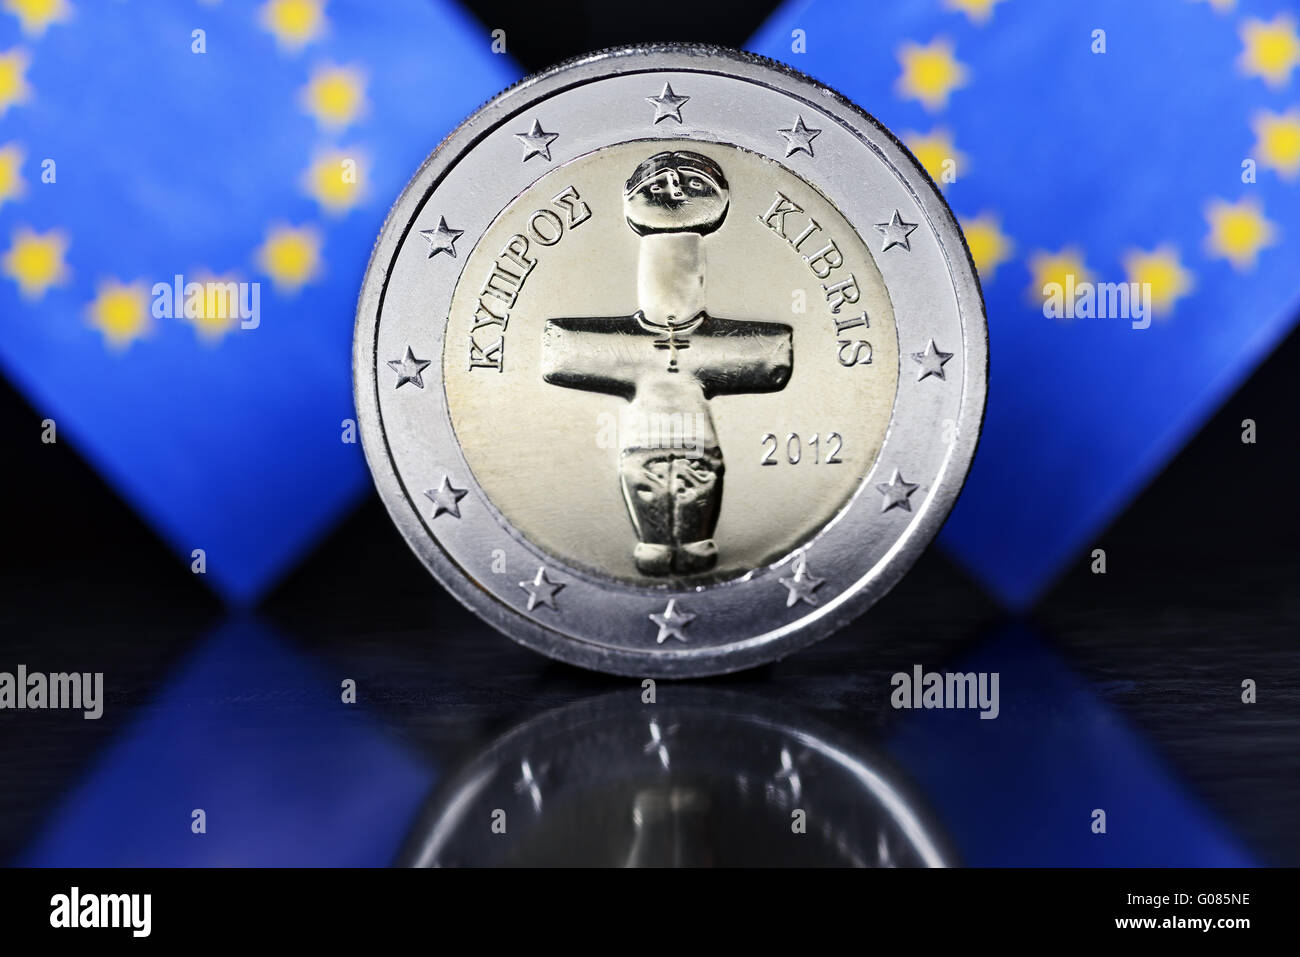 Euro Coins Cyprus Hi-res Stock Photography And Images Page, 46% OFF